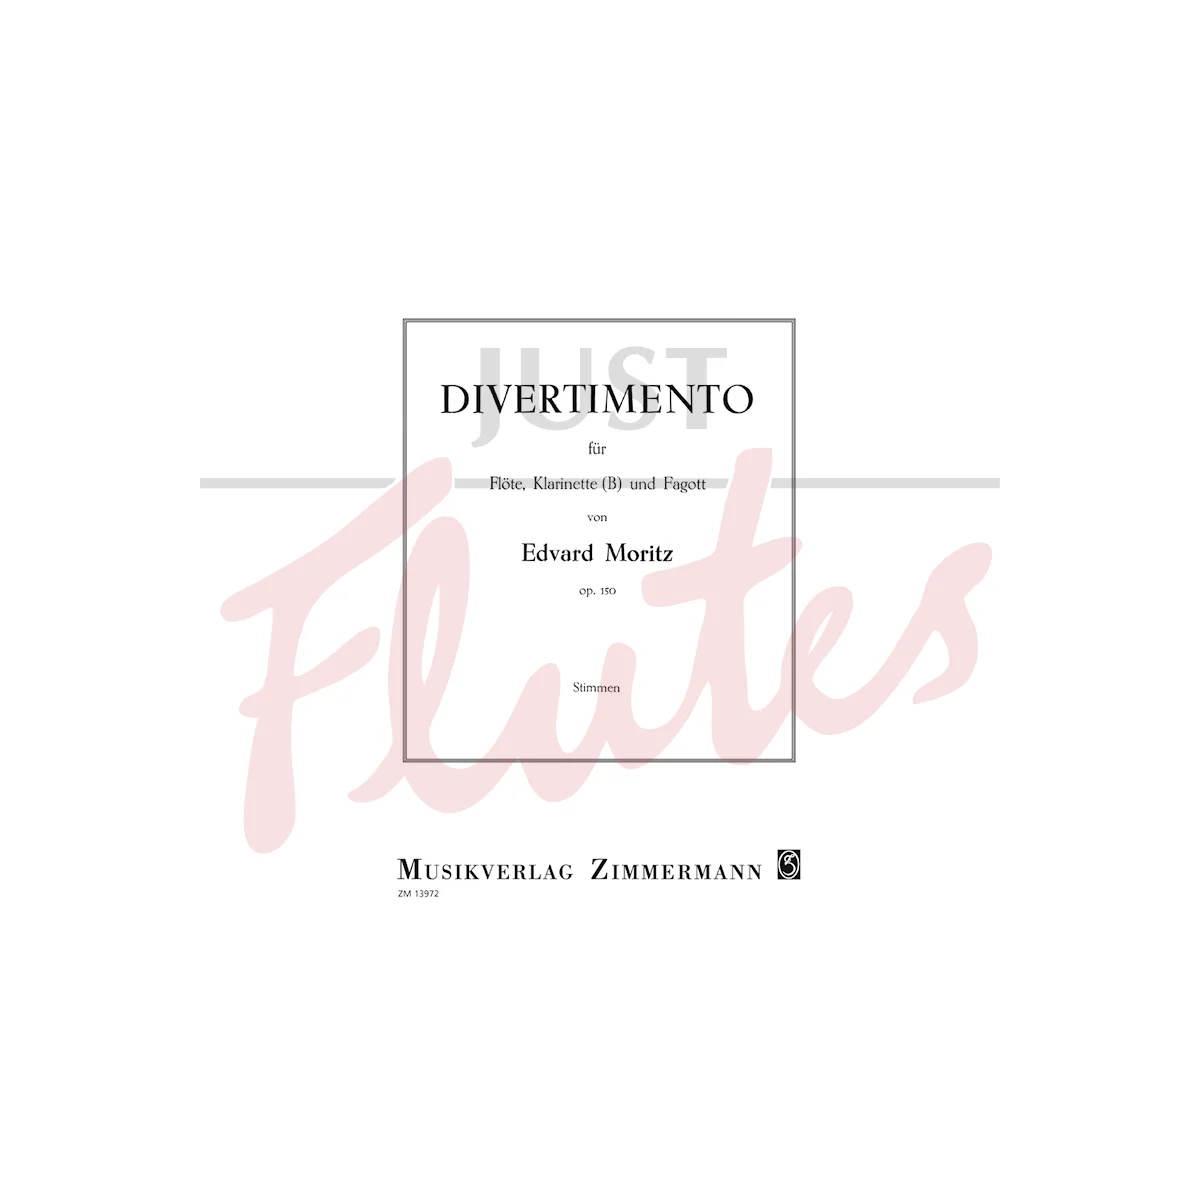 Divertimento for Flute, Clarinet and Bassoon